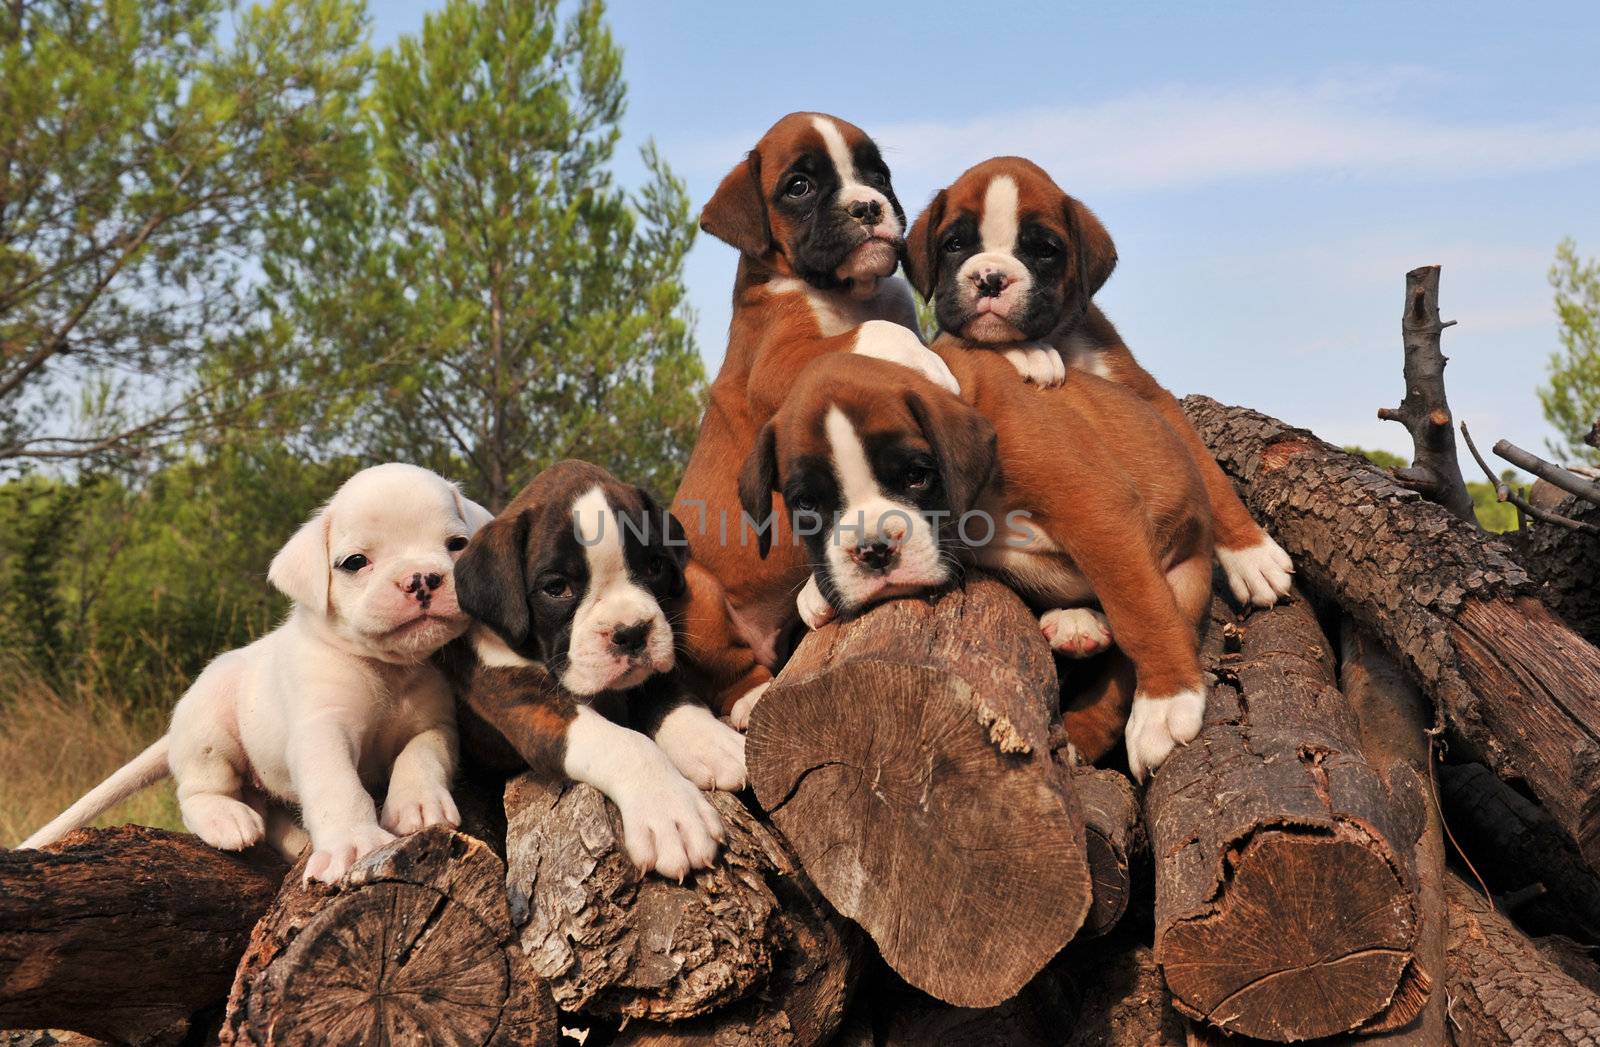 five puppies boxer by cynoclub